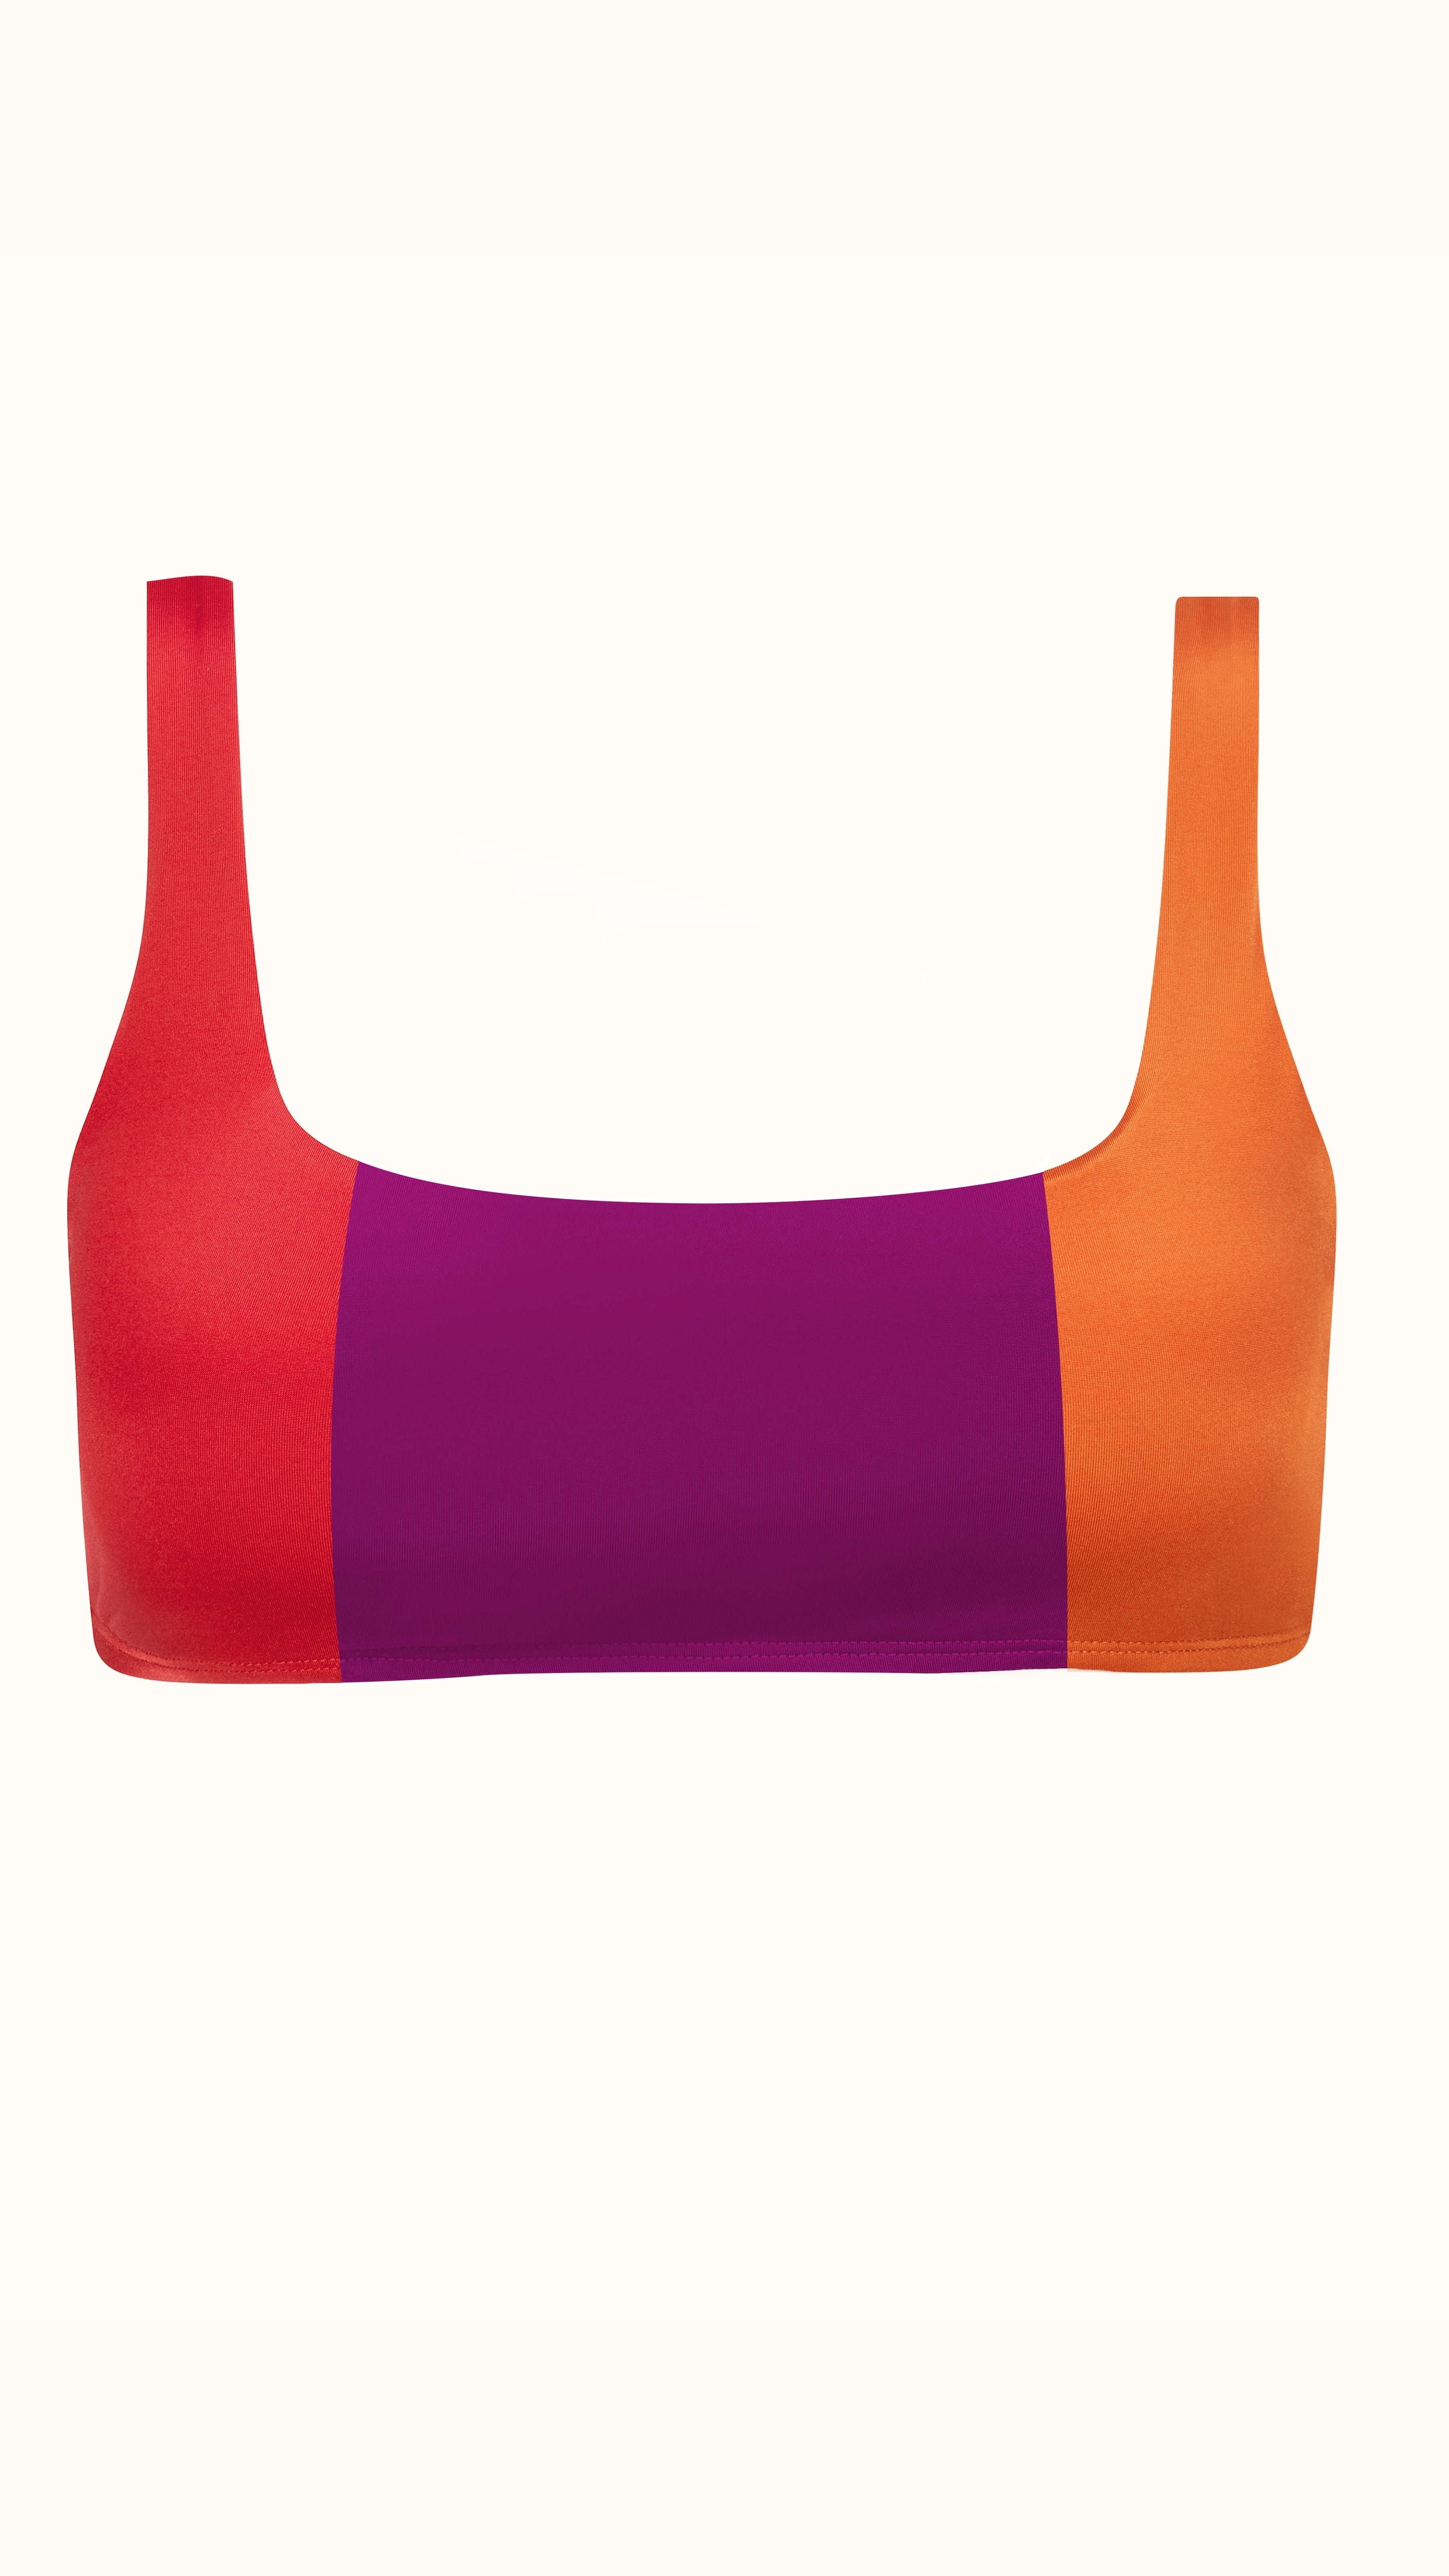 Talia Collins The Tricolor Athletic Top in Red, plum and orange. Sustainable swimwear made from recycled materials. Sports bra style bikini top. Scoop neck with full coverage bikini bathing suit top. Color block. Experience 27 Madrid. Product photo front view.